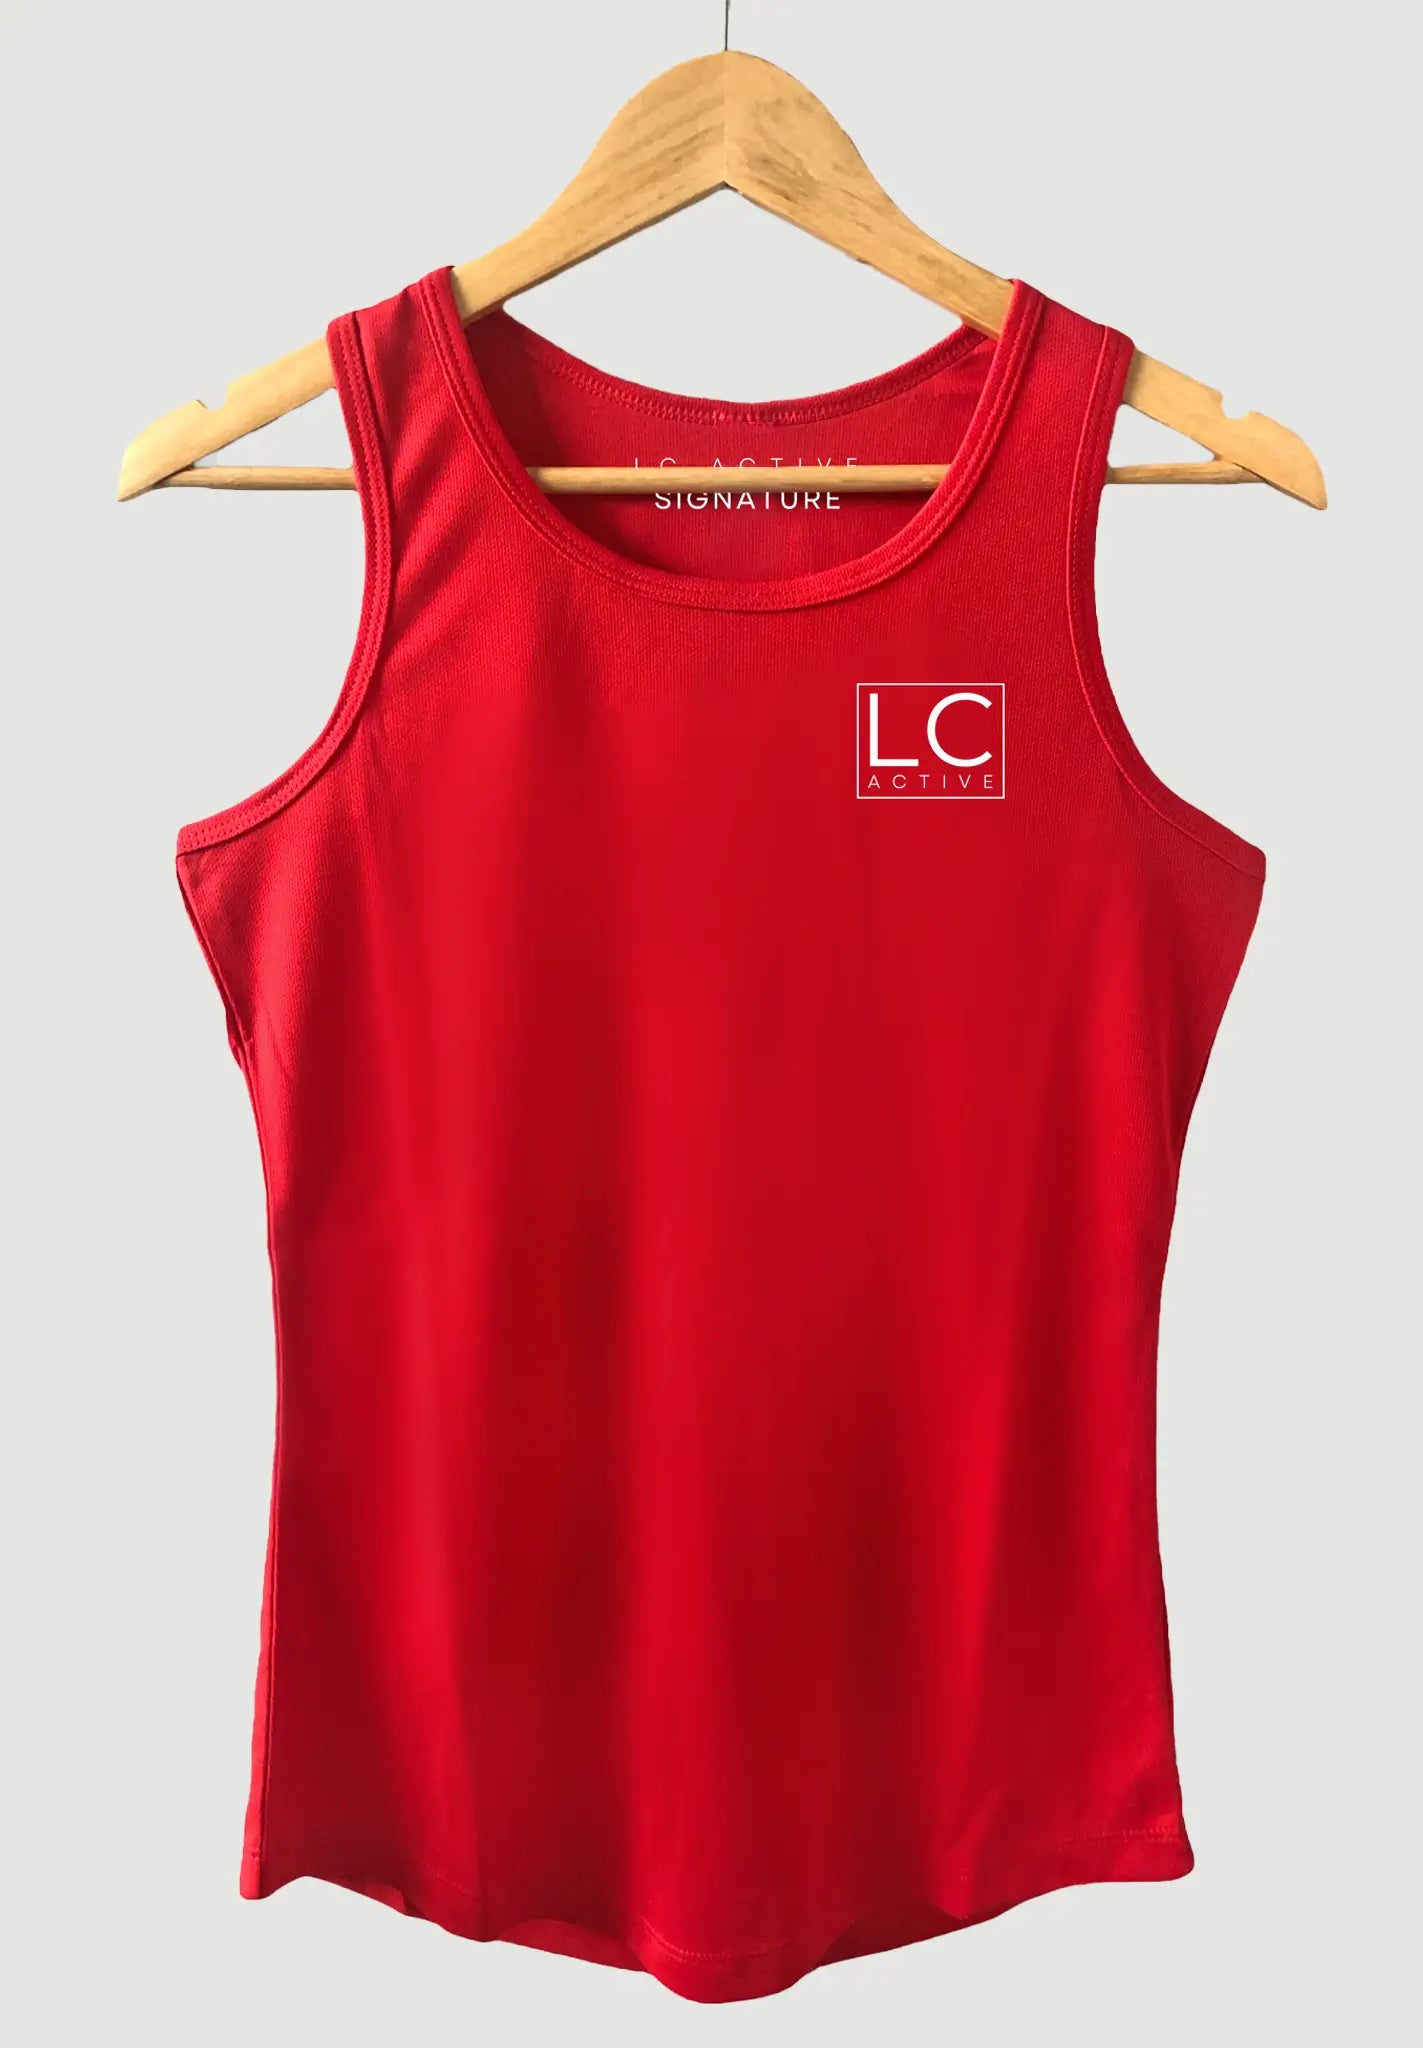 Womens Training Vest Red, Gym Tops For Women